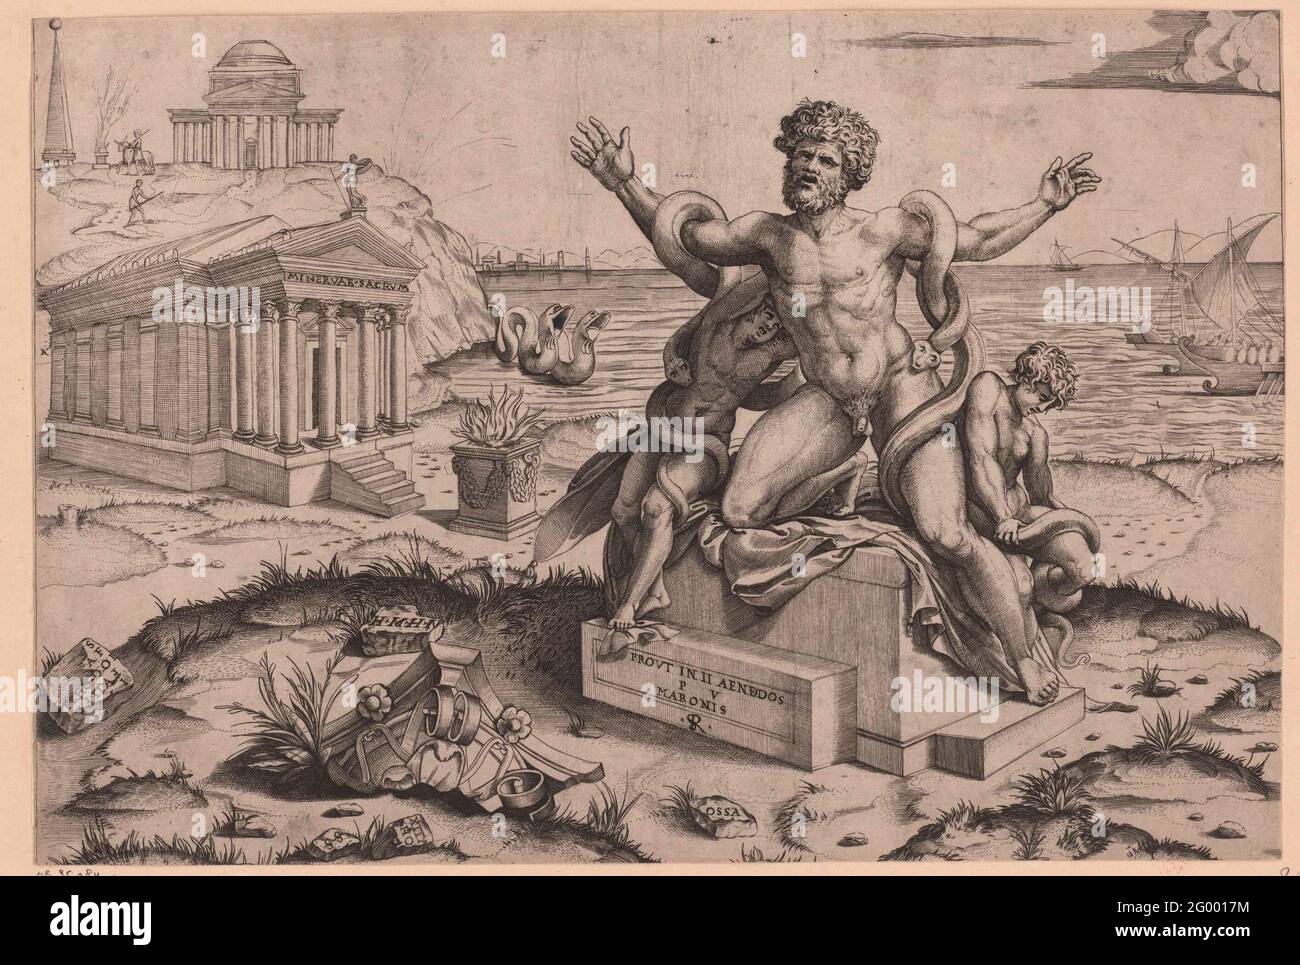 Laocön and his sons. Laocoön and his sons are attacked by two hoses while preparing a sacrificial ritual for a temple for Minerva. In the background the sea with two large seaters. Stock Photo